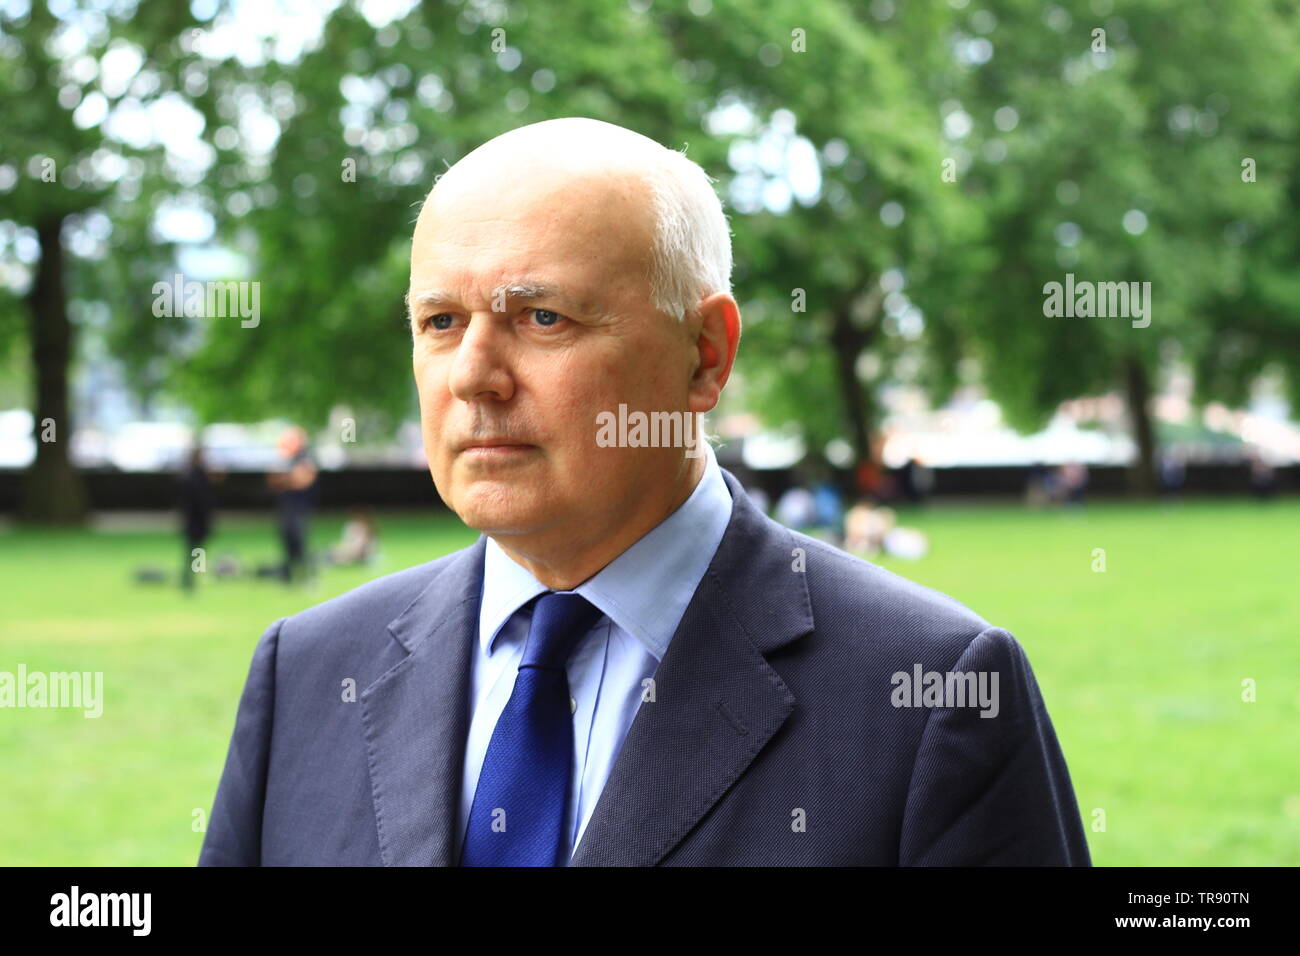 IAIN DUNCAN SMITH IN WESTMINSTER ON THE 30TH MAY 2019. IDS. CONSERVATIVE PARTY POLITICIANS. BRITISH POLITICIANS. UK POLITICS. POLITICING. POLITICS. MINISTERS. LEADERS. CONSERVATIVE AND UNION PARTY. TORY PARTY. TORIES. Stock Photo